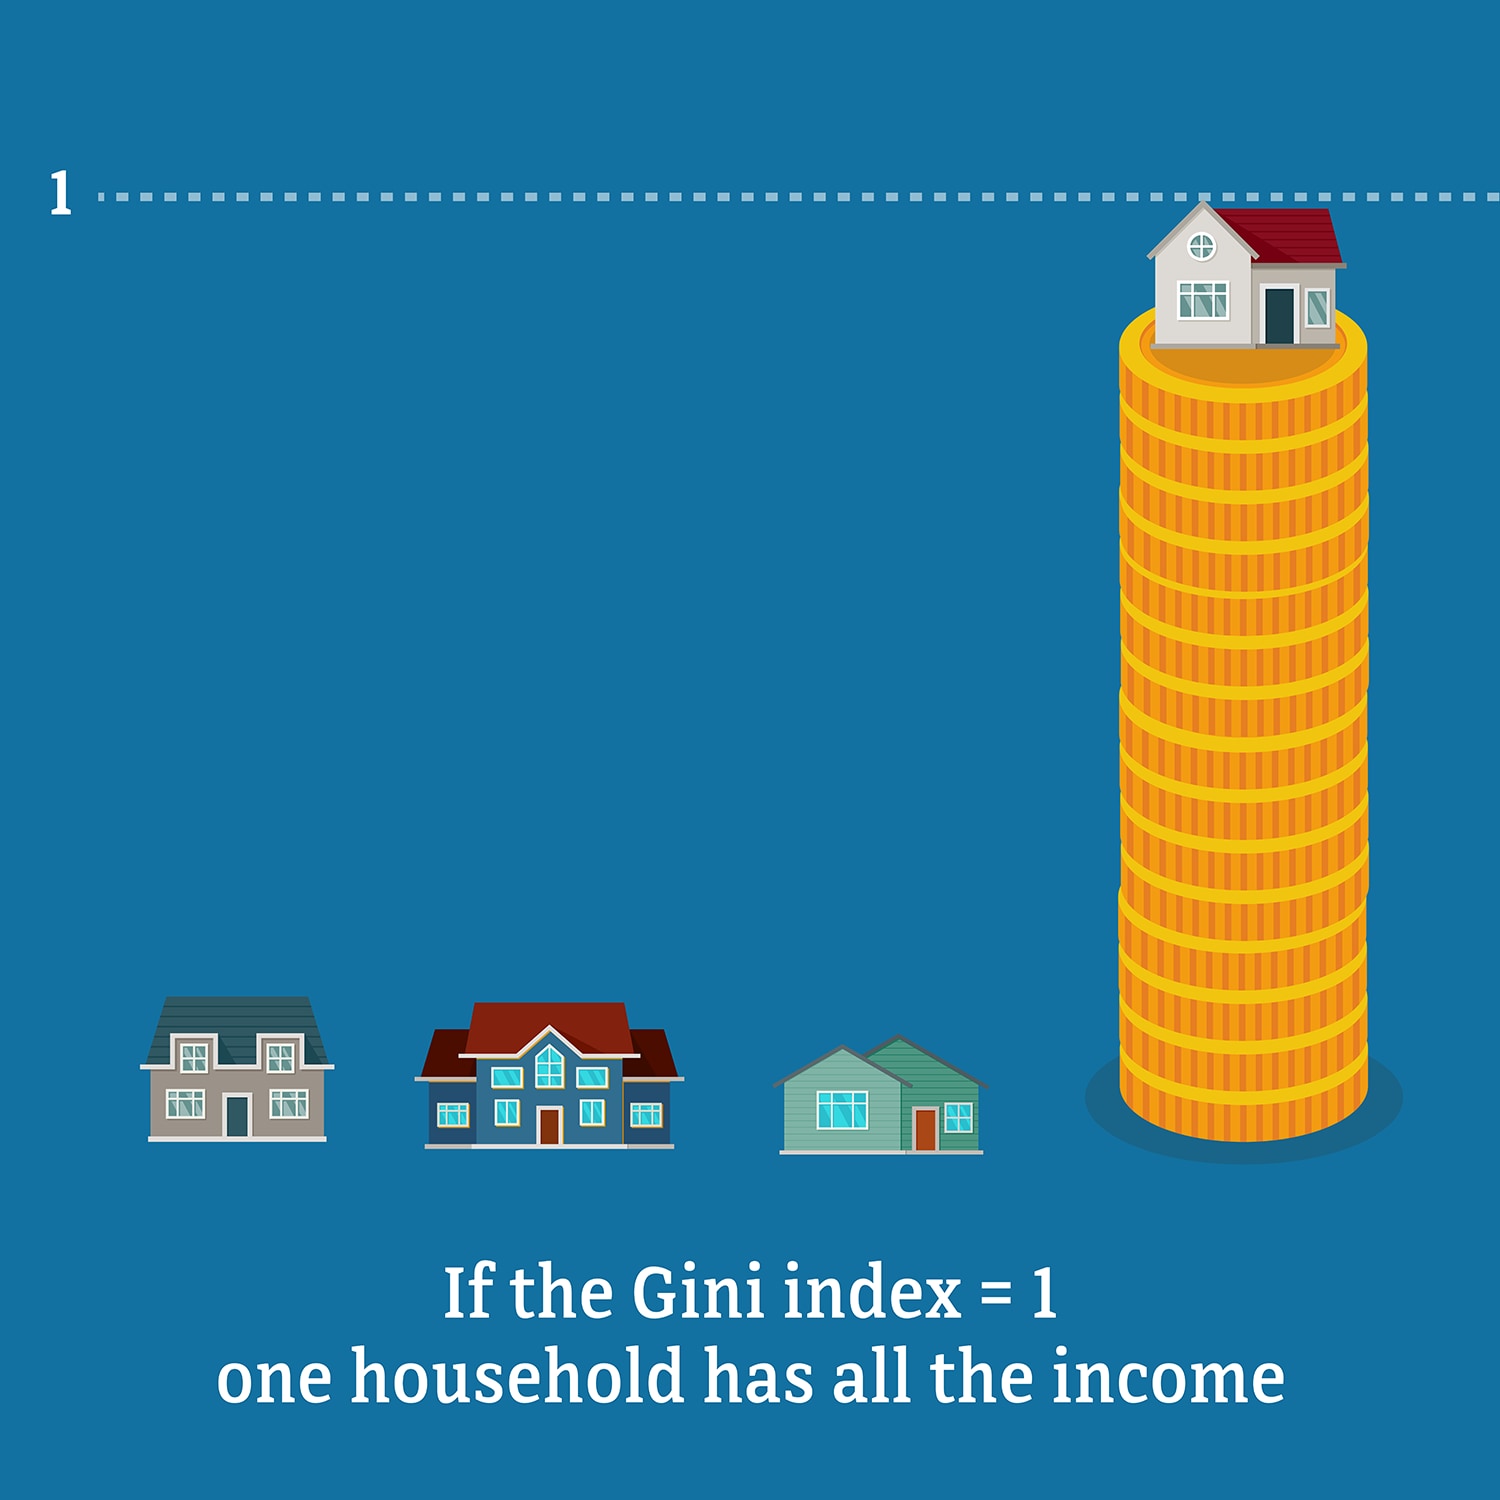 If the Gini index = 1, one household has all the income.